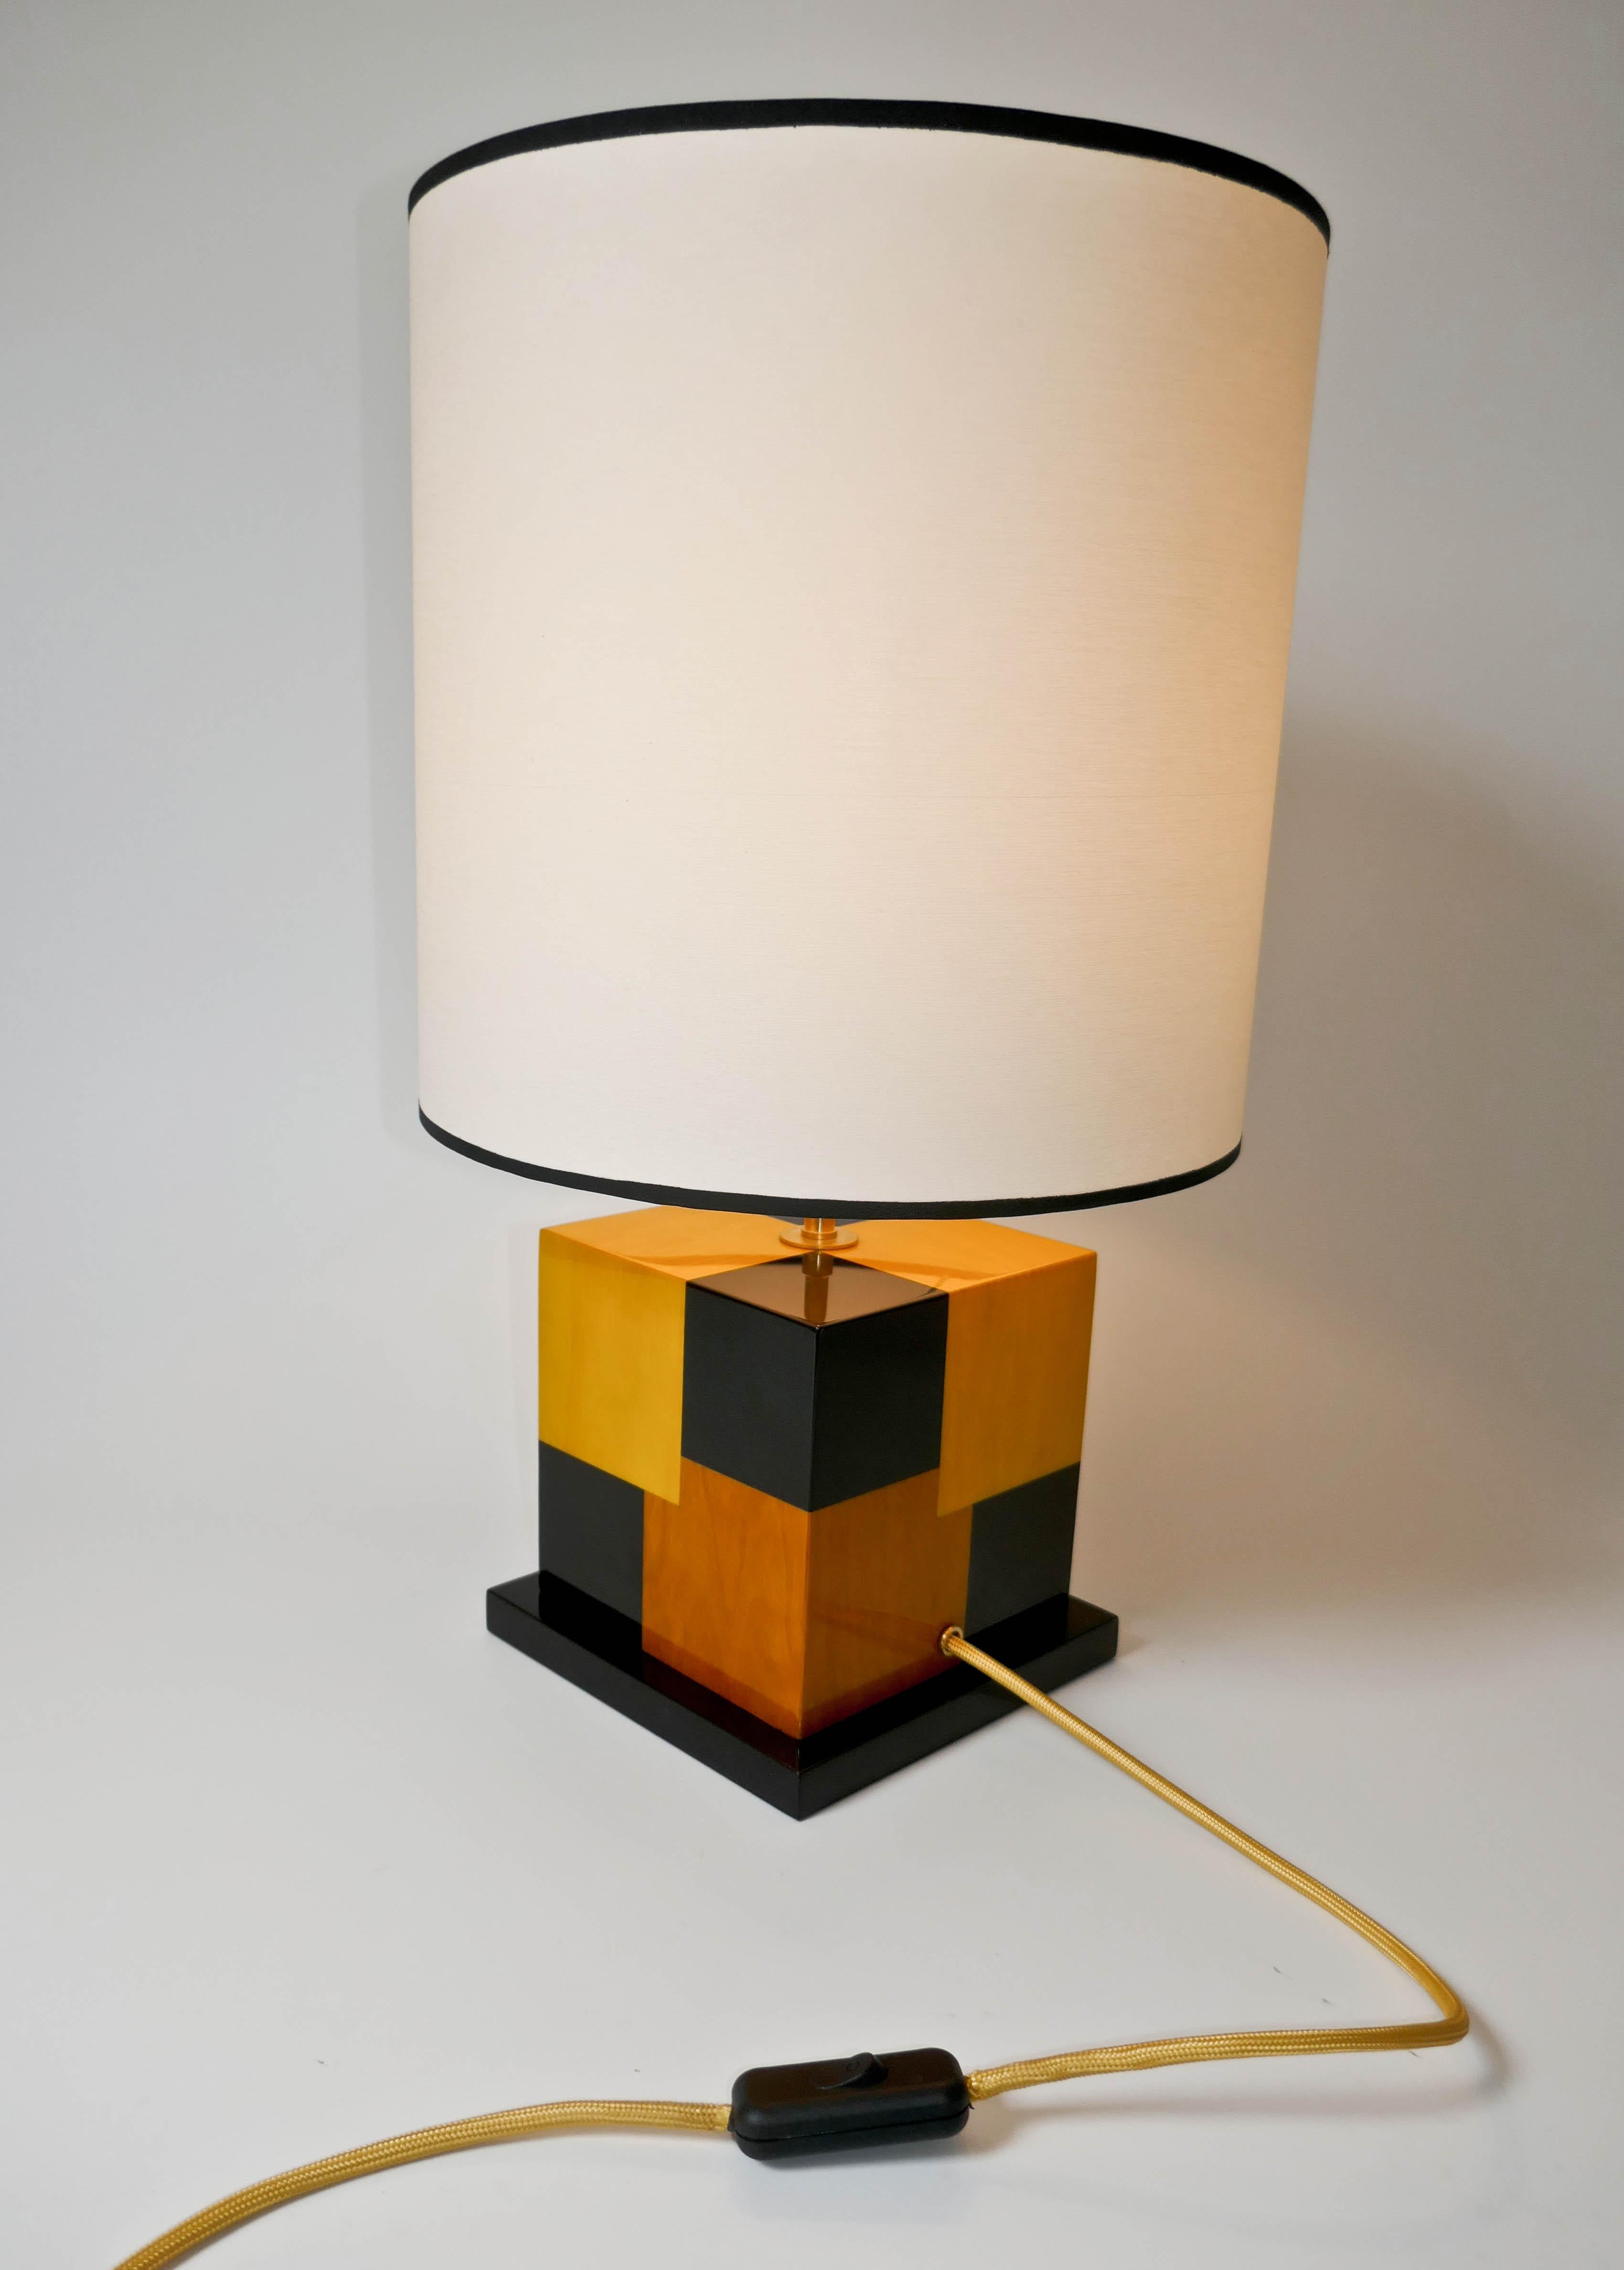 Table lamp in tinted black, light and dark Yellow sycamore marquetry designed by Aymeric Lefort.
Carefully build in our Parisian workshop this lamp has a Kinetic effect using the different colors to create an impression of deepness. The lamp is